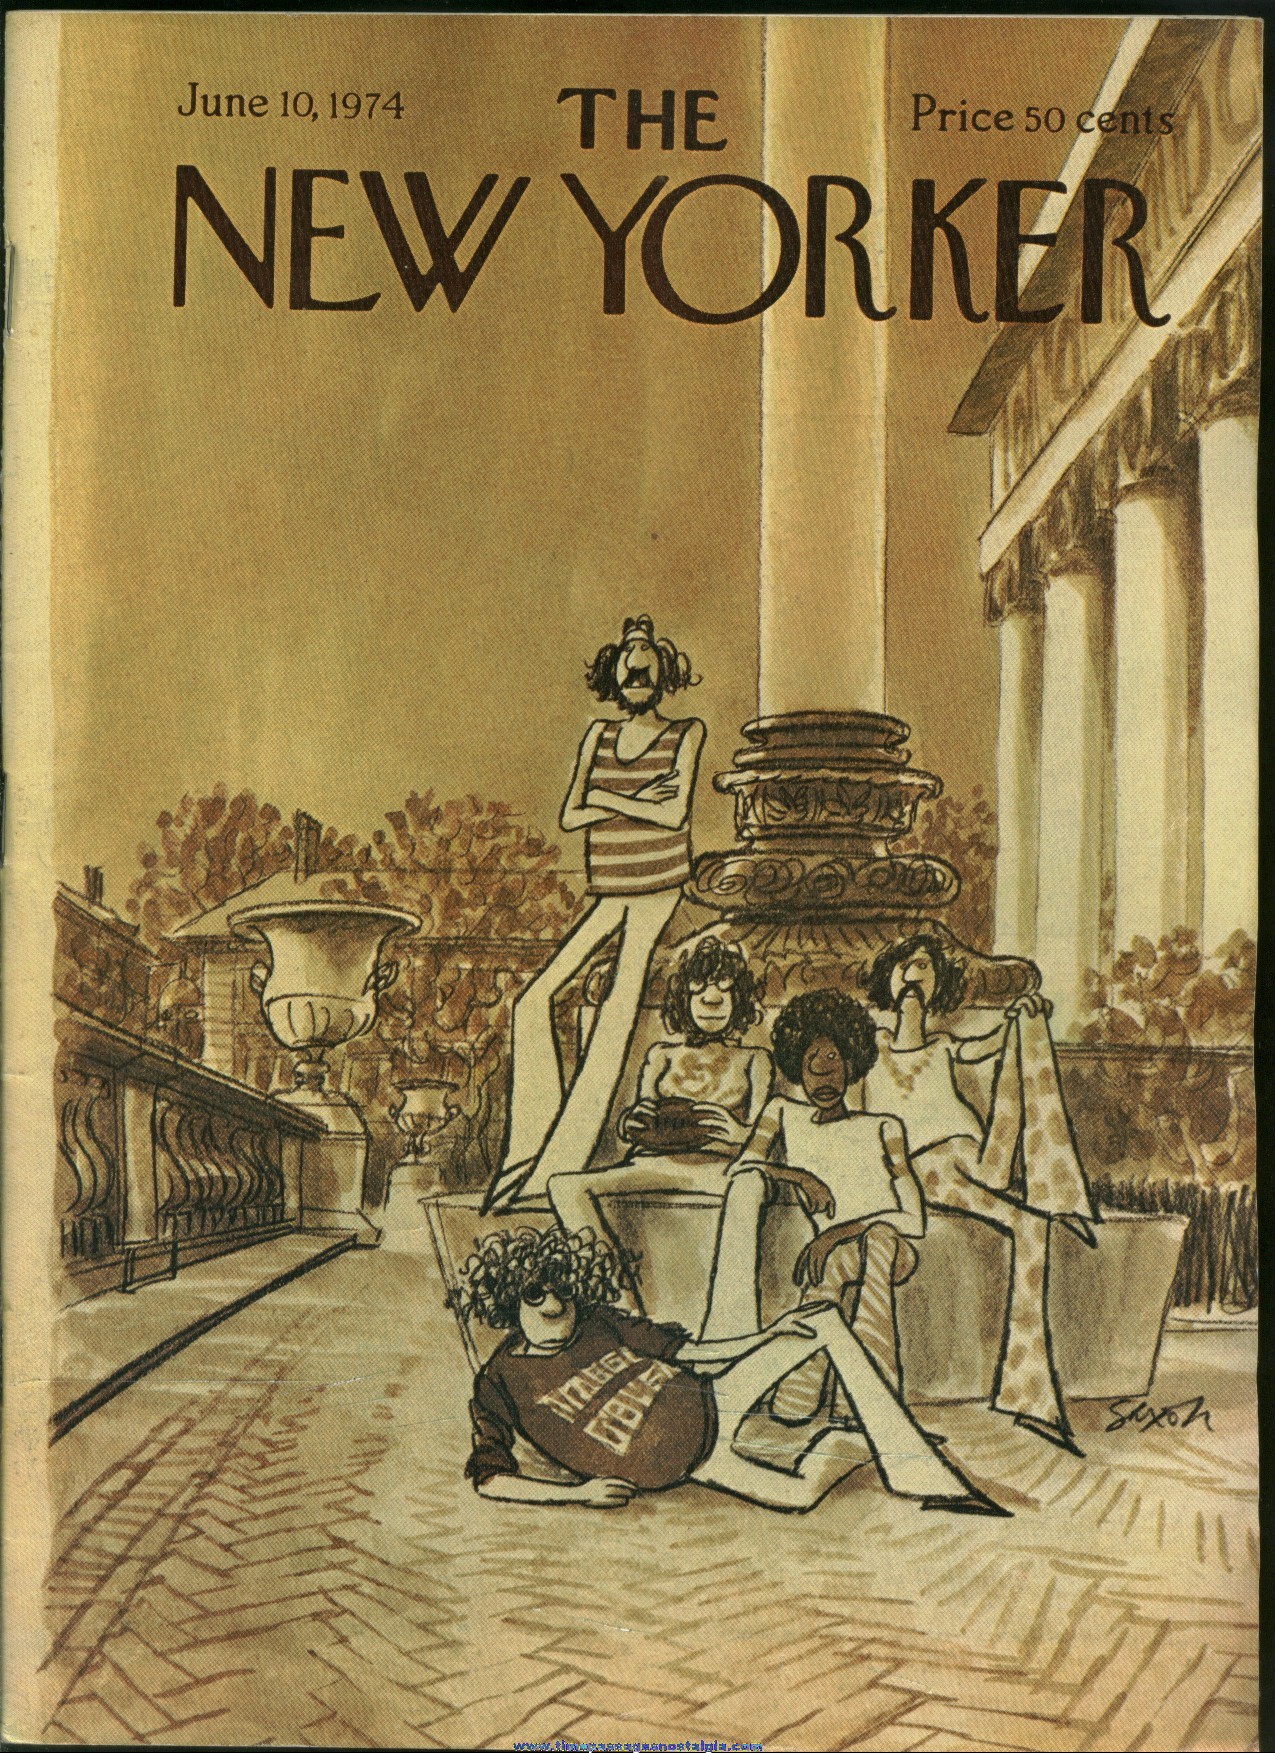 New Yorker Magazine - June 10, 1974 - Cover by Charles Saxon